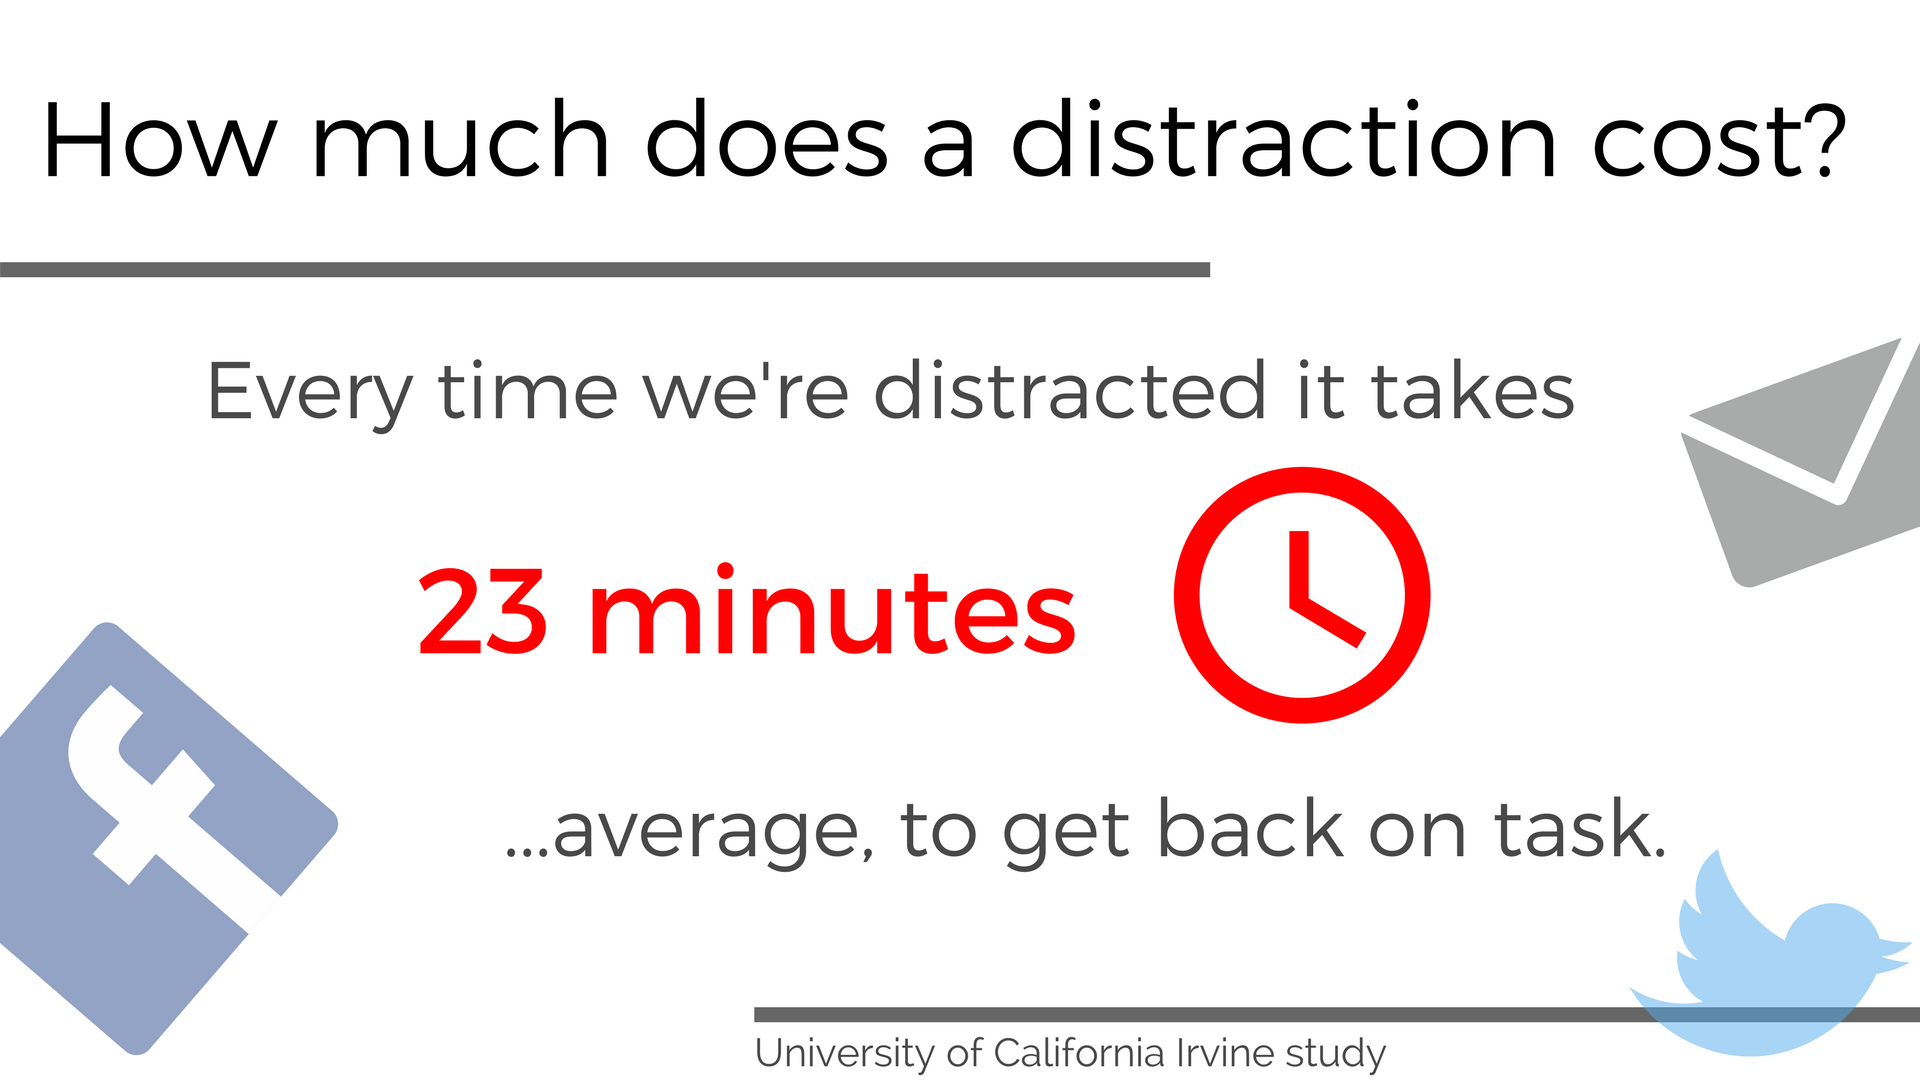 23 minutes are lost to every digital distraction